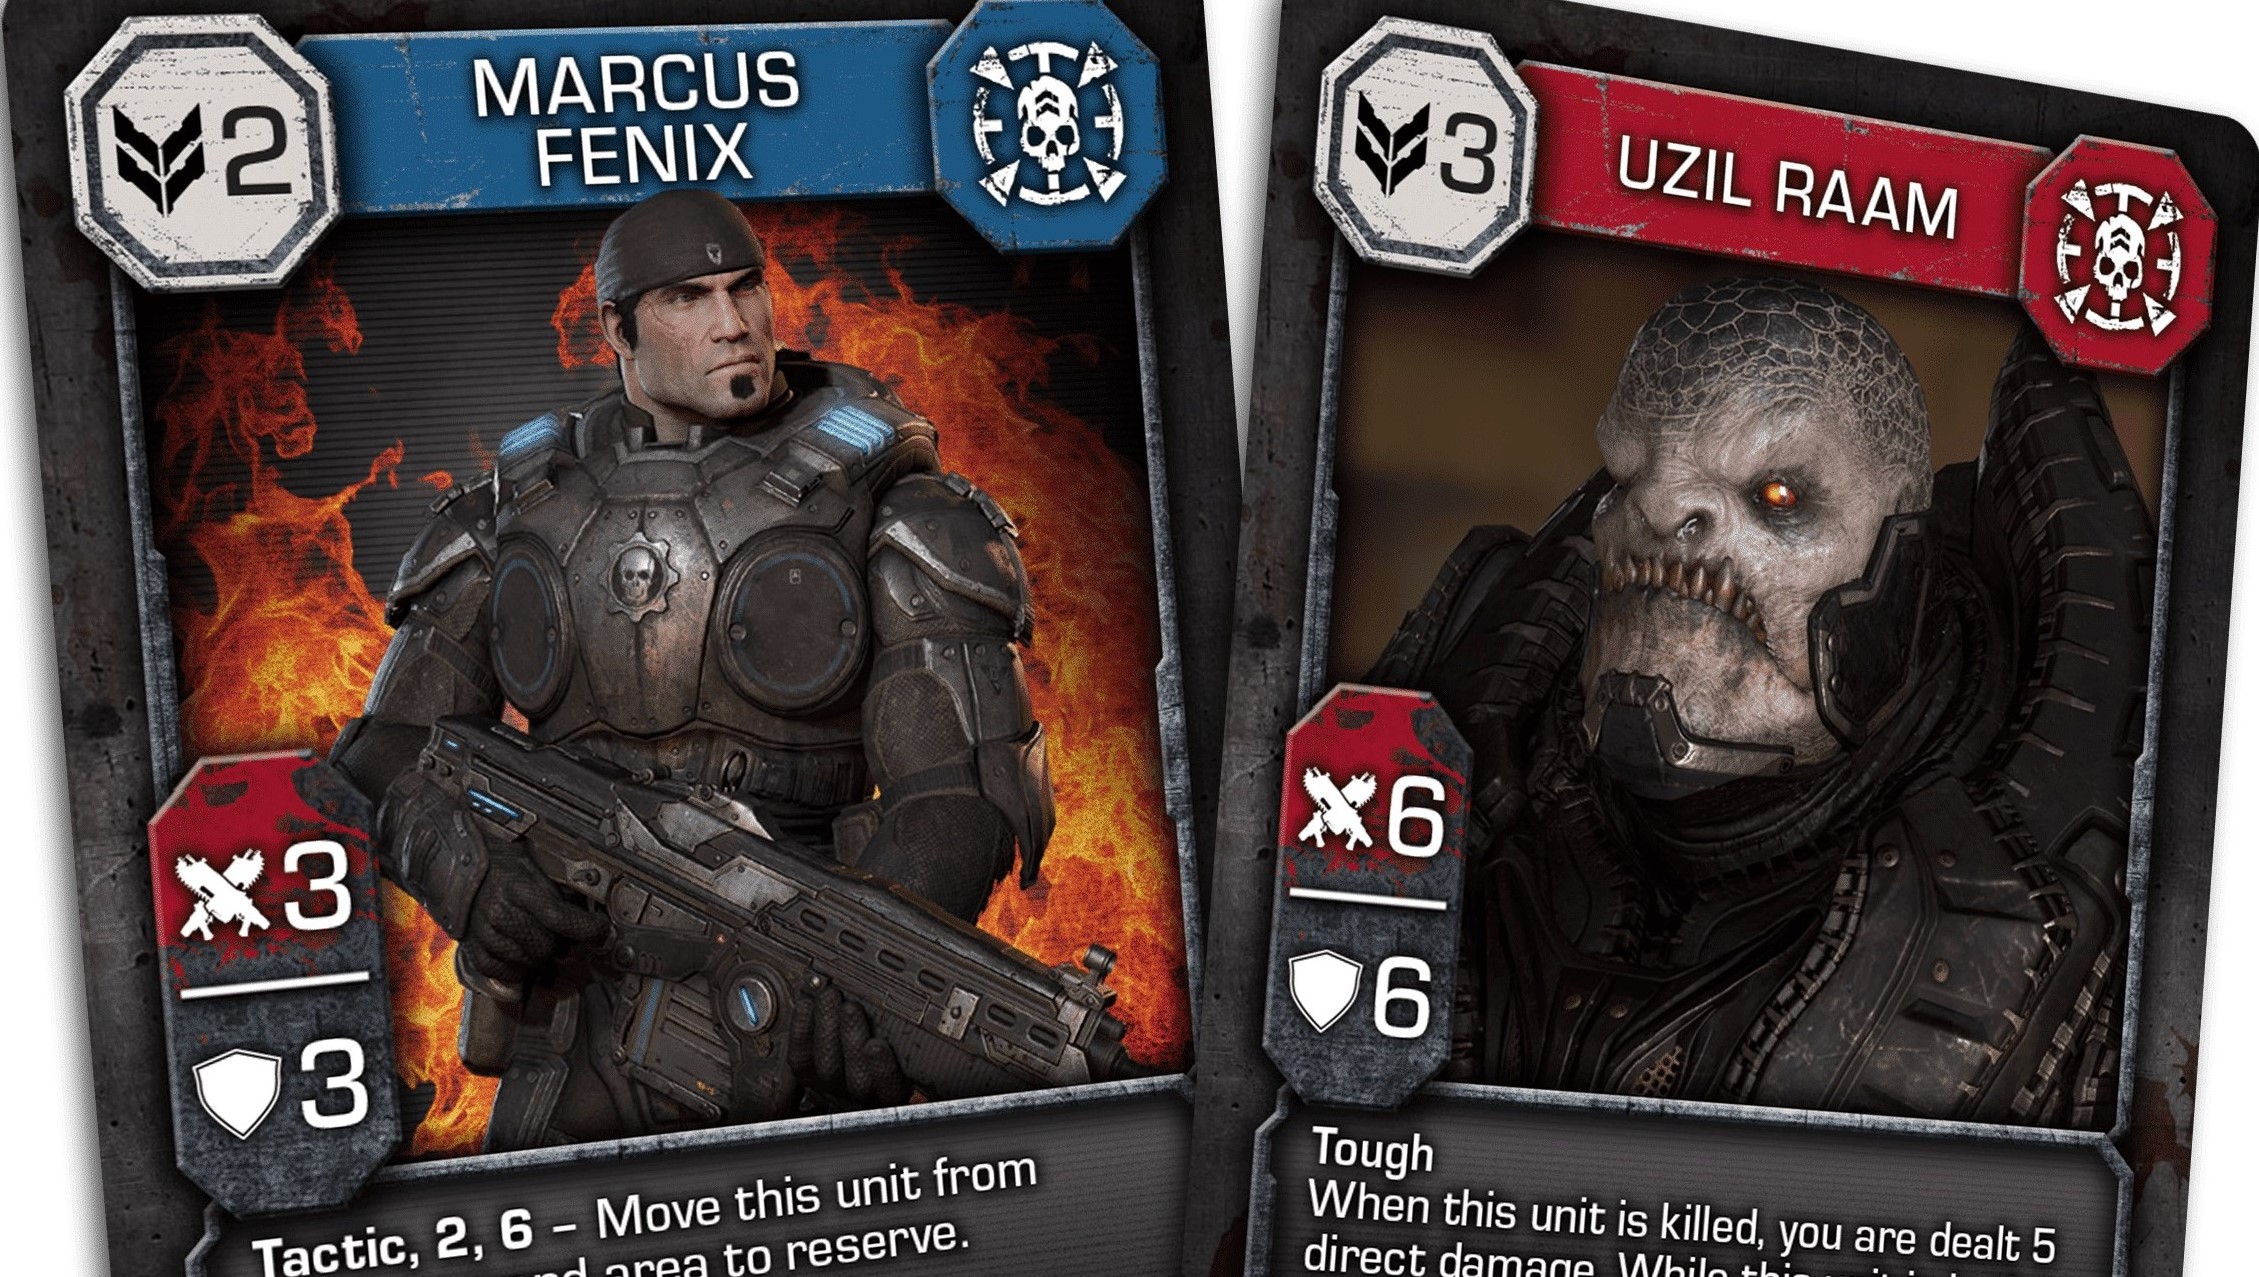 Gears of War: The Card Game' Steamforged Info